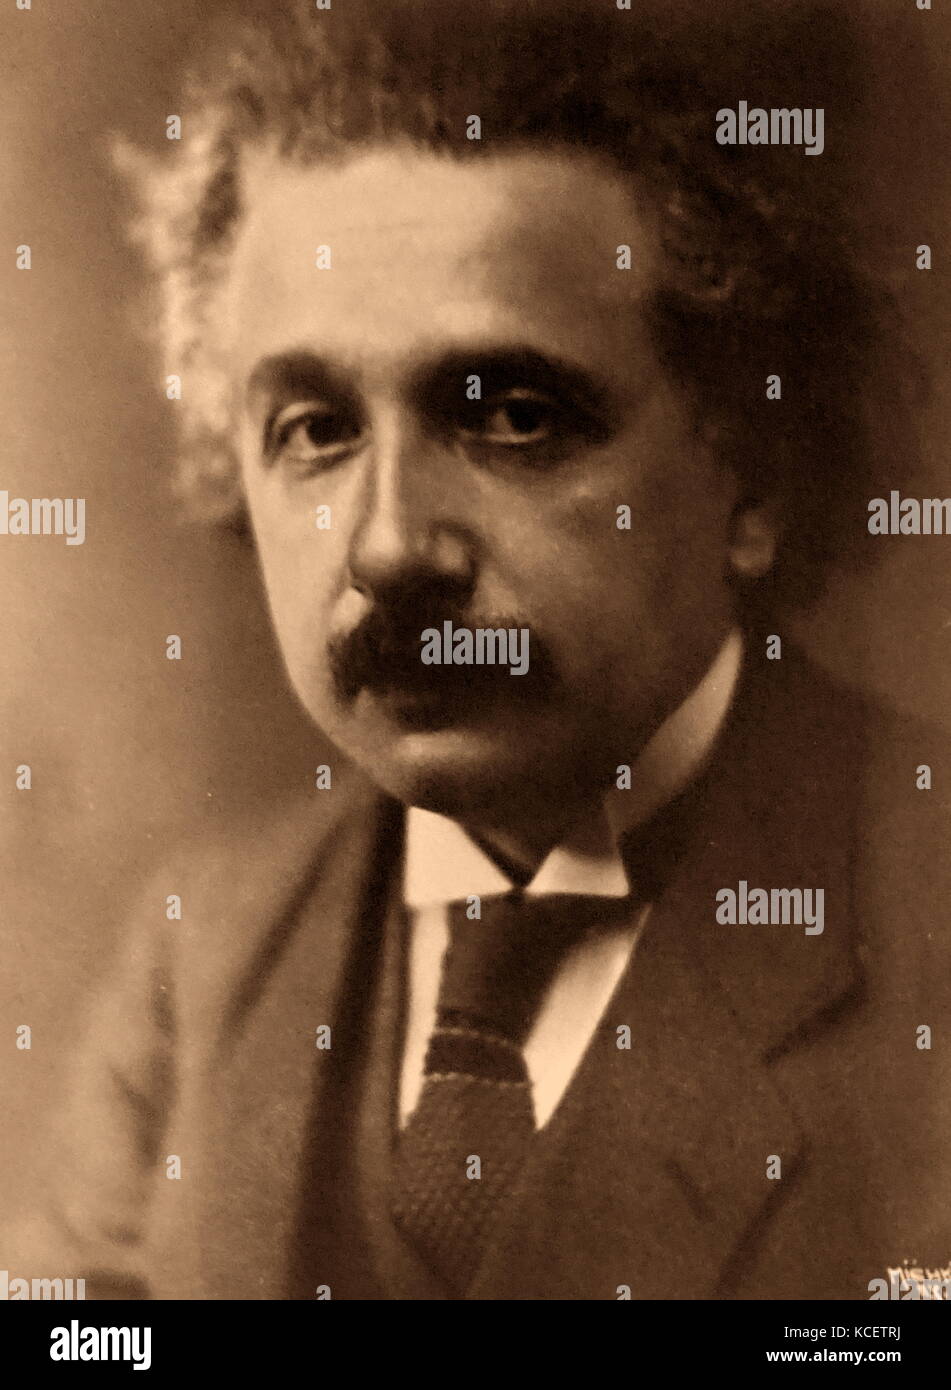 Albert Einstein (1879 – 1955), a German-born theoretical physicist. He developed the general theory of relativity, one of the two pillars of modern physics (alongside quantum mechanics). Stock Photo